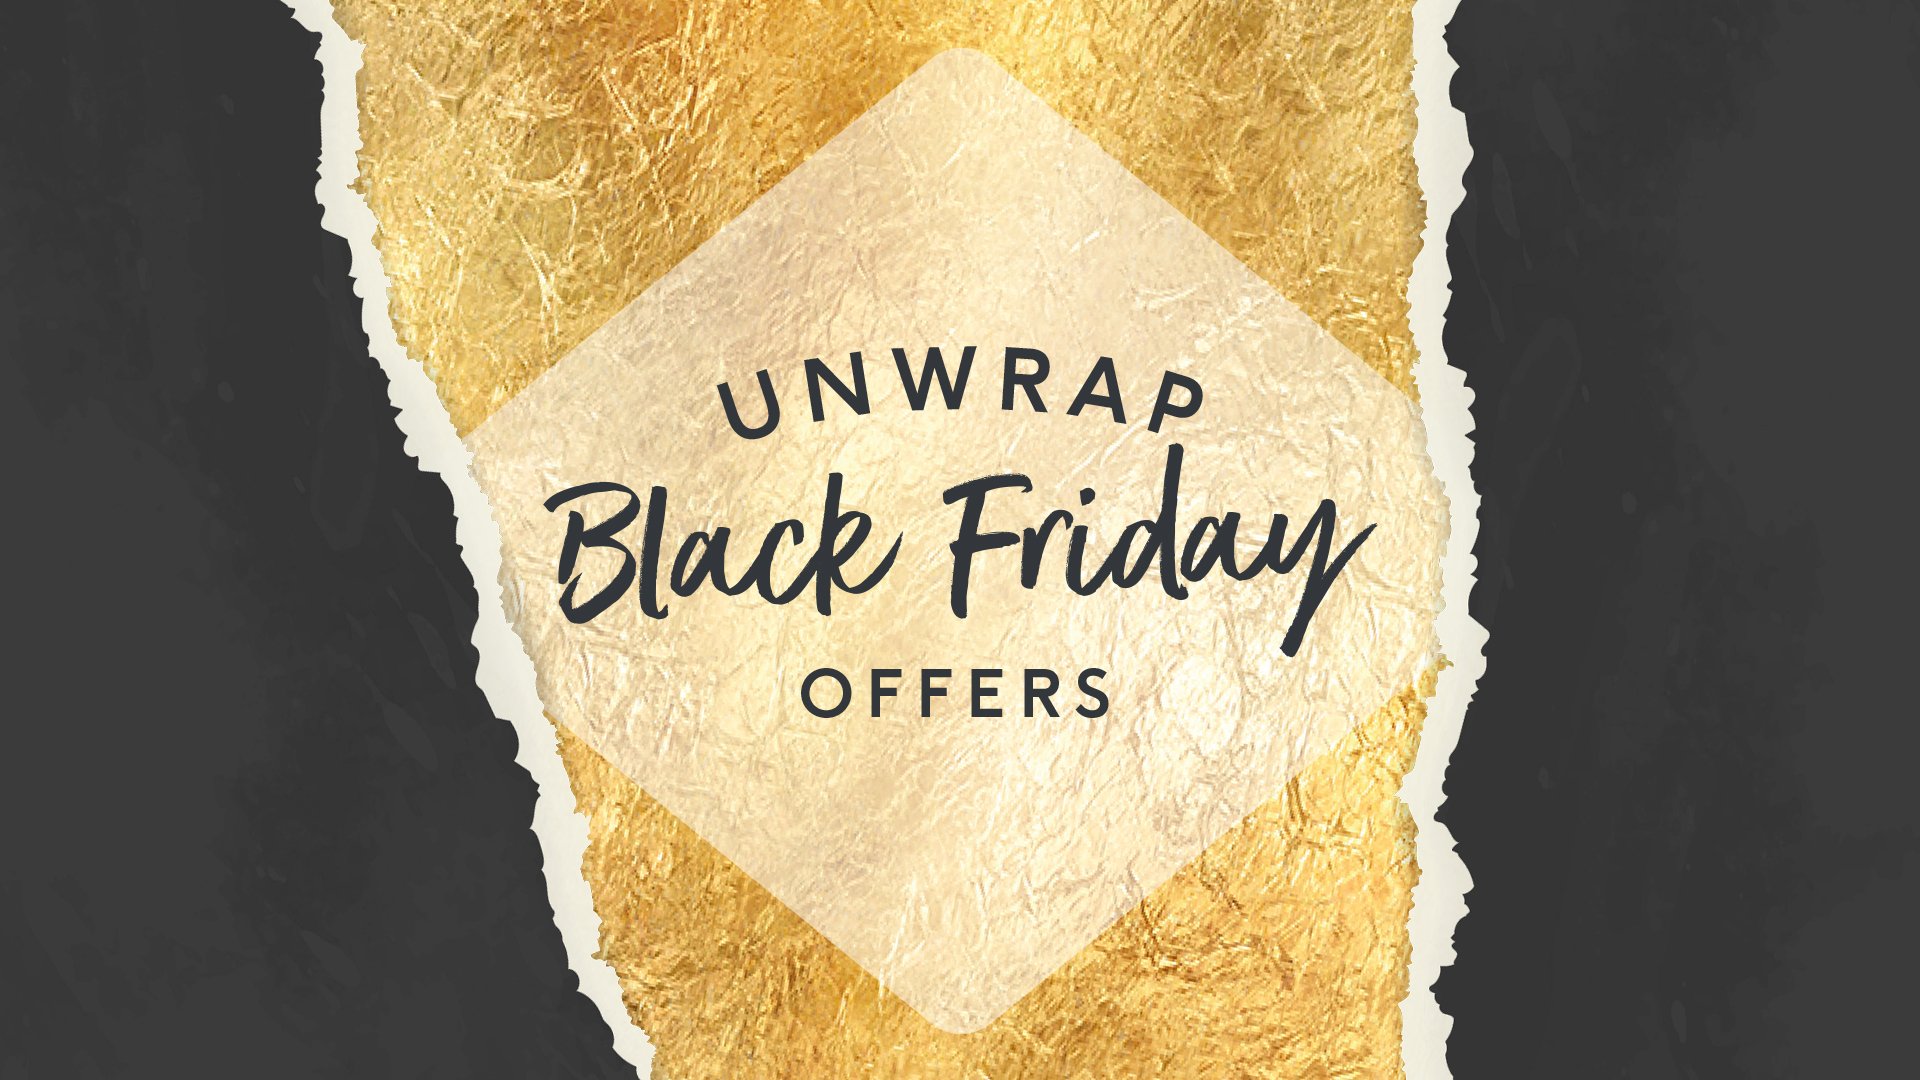 Black Friday offers at exante